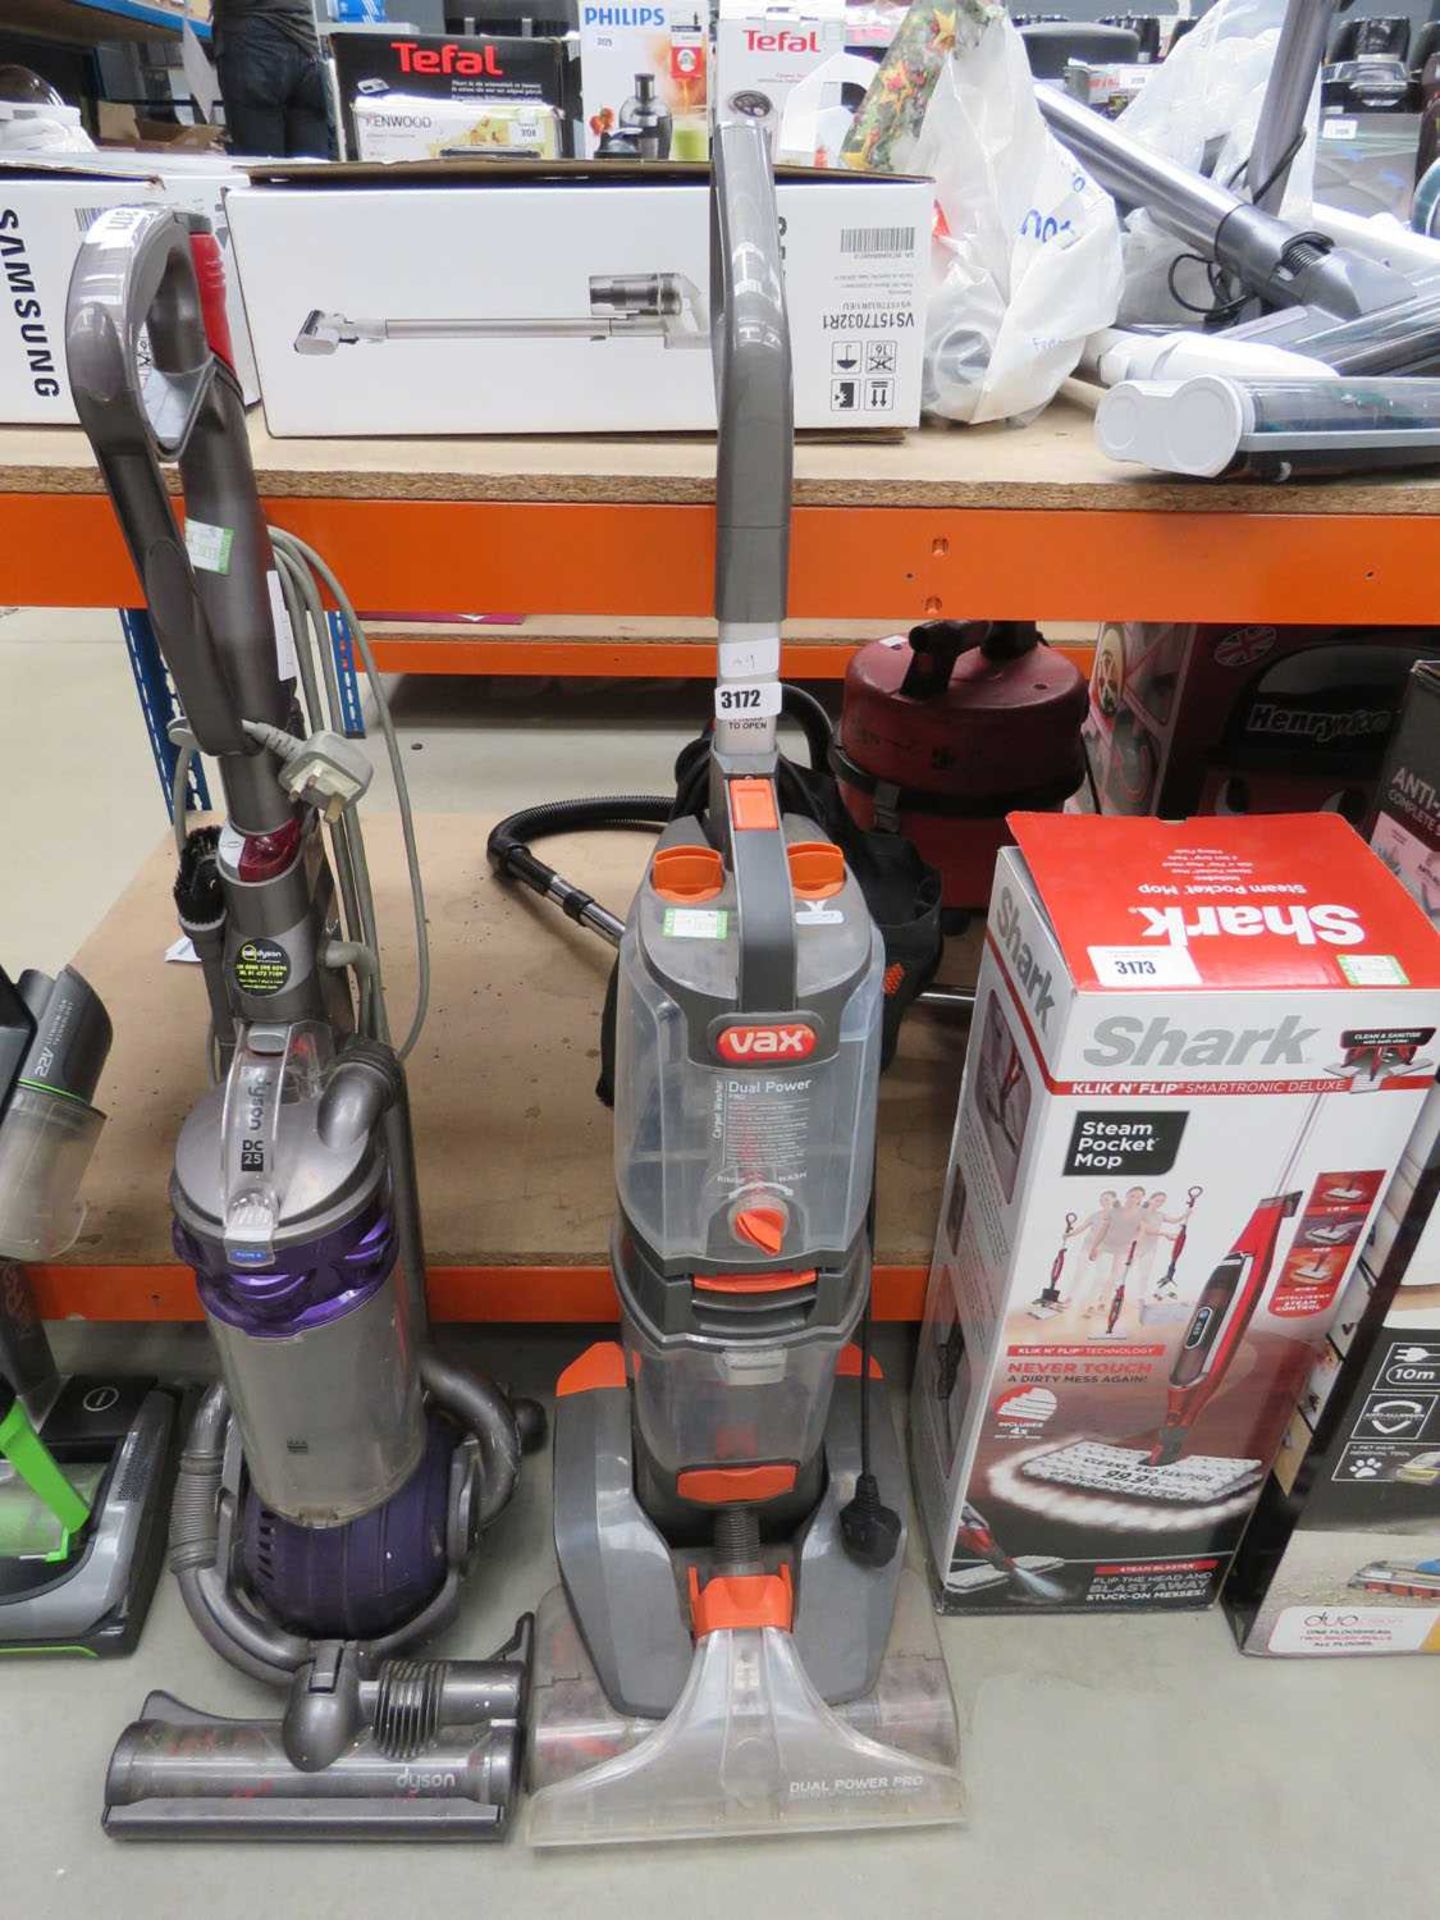 Vax dual power pro upright carpet washer and vacuum